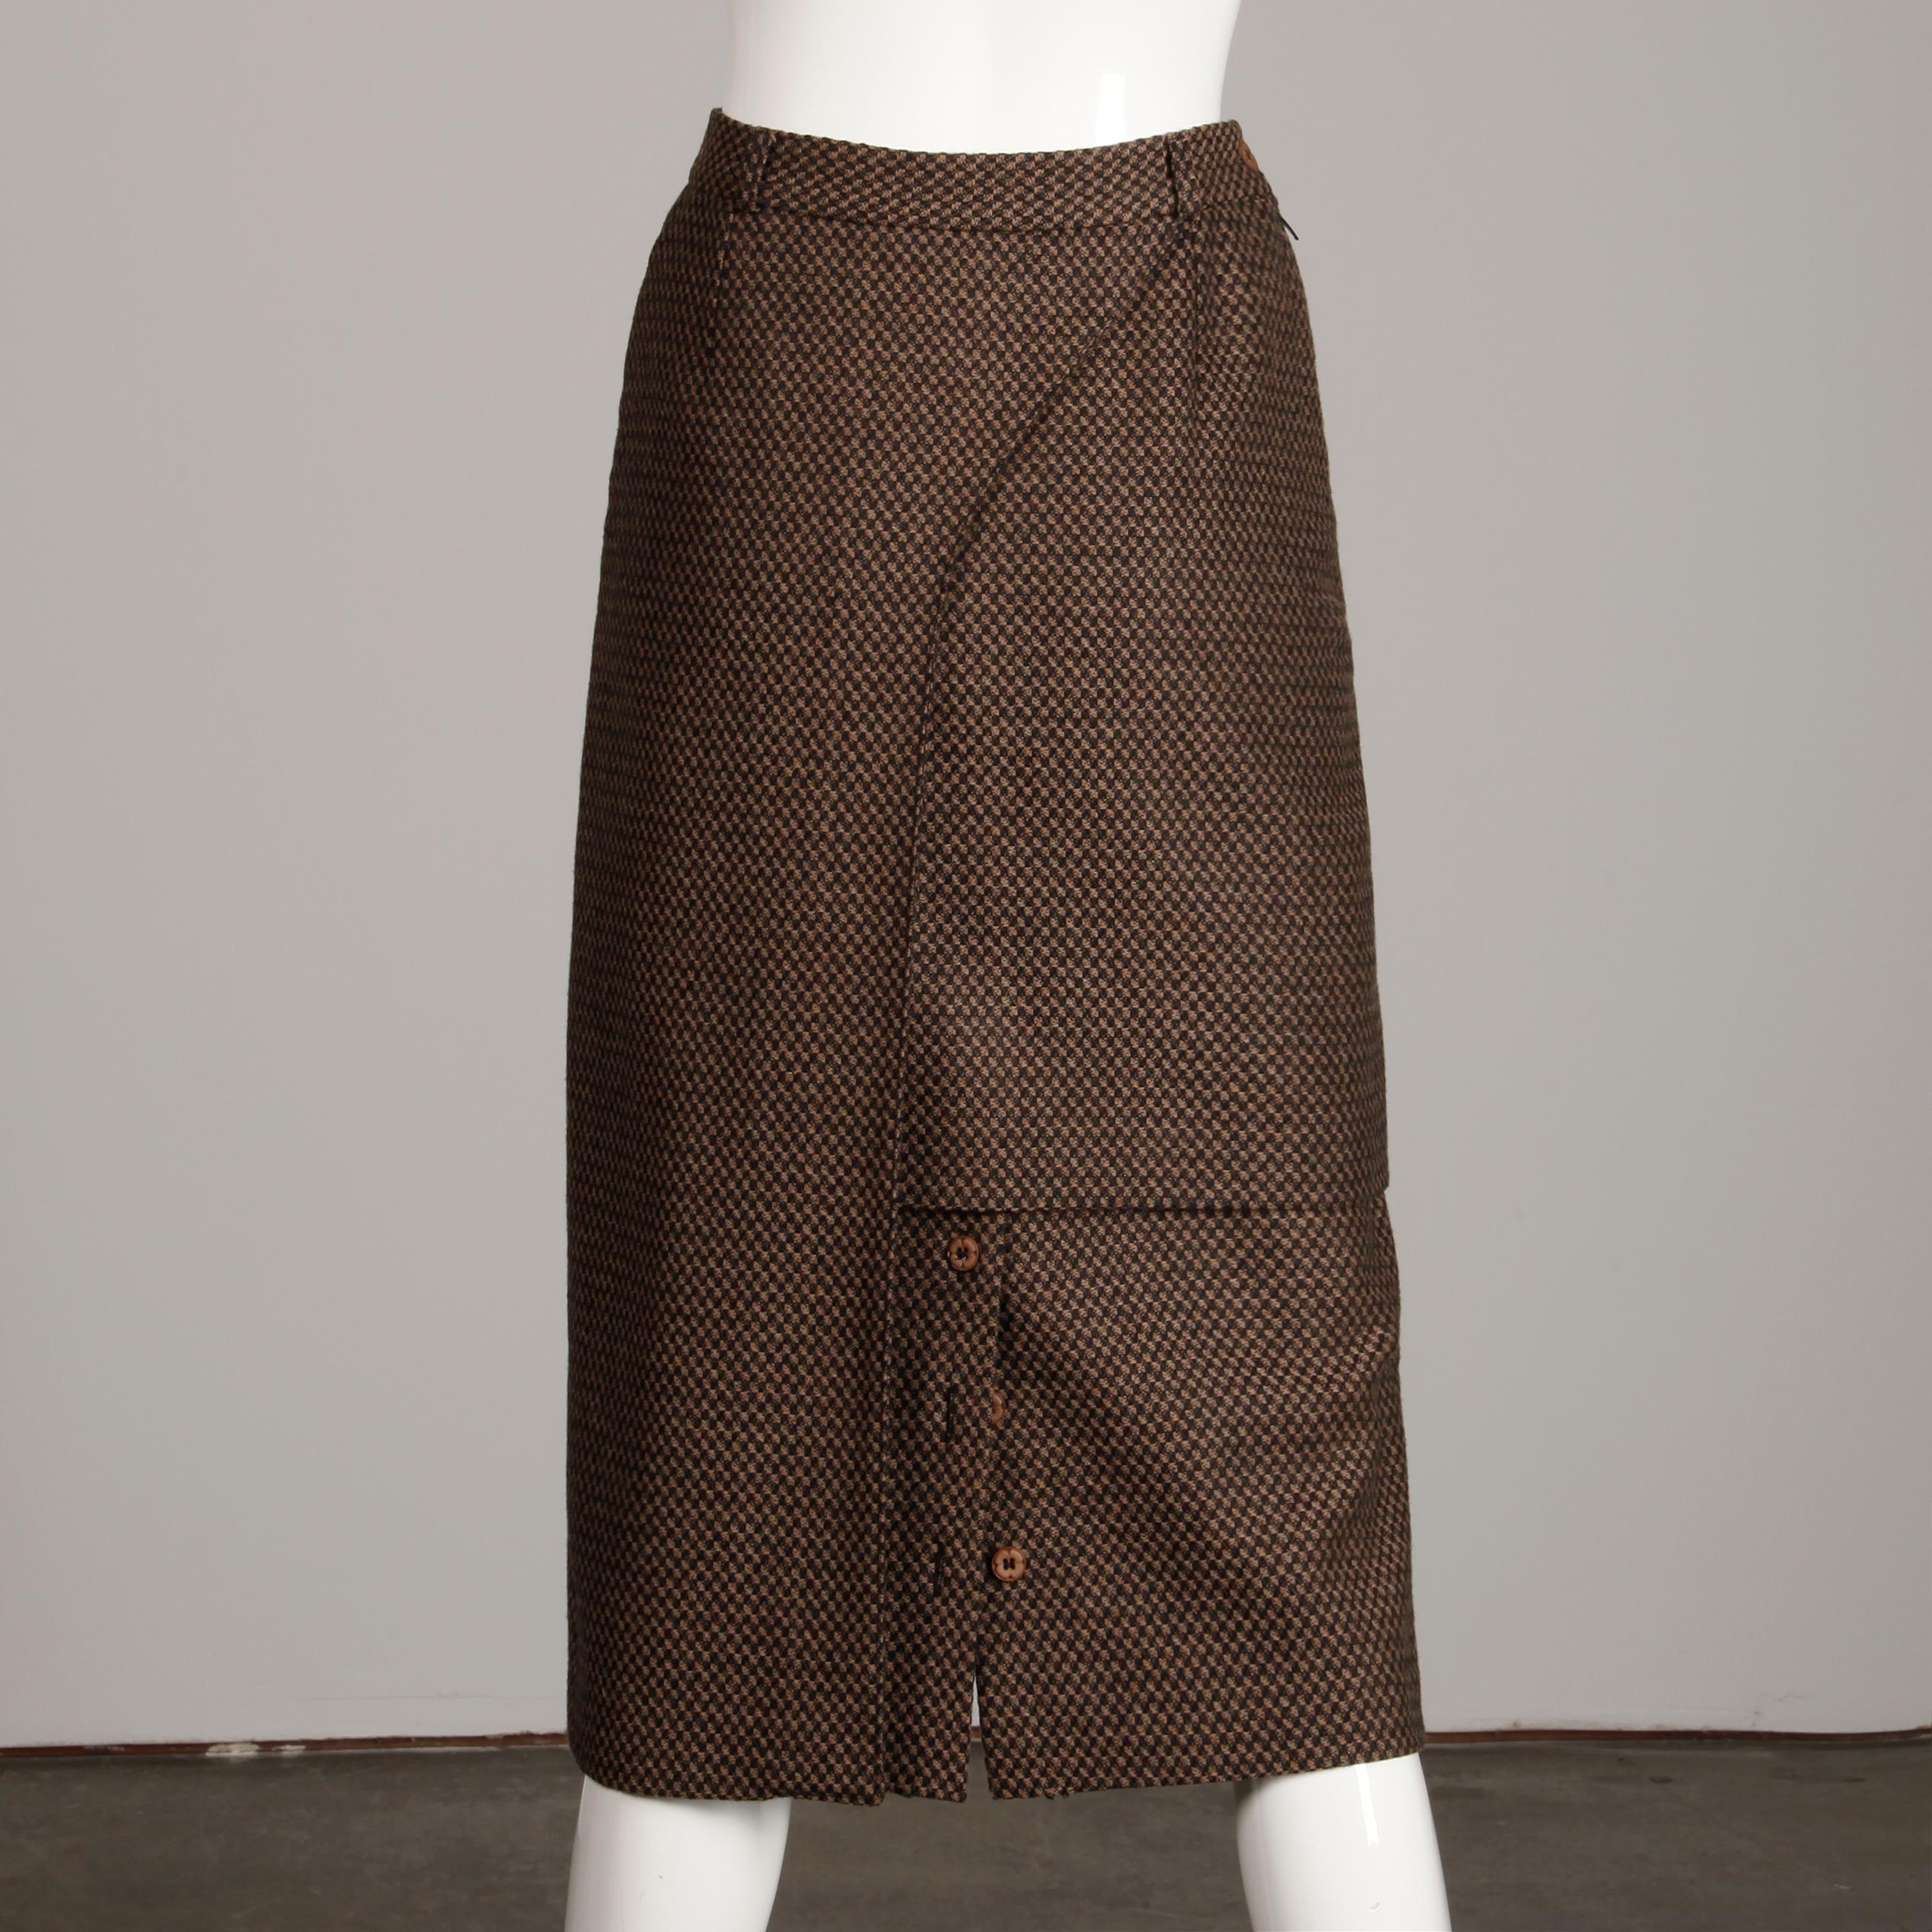 Philippe Dalma Paris Vintage Avant Garde Pencil Skirt- 1980s France In Excellent Condition For Sale In Sparks, NV